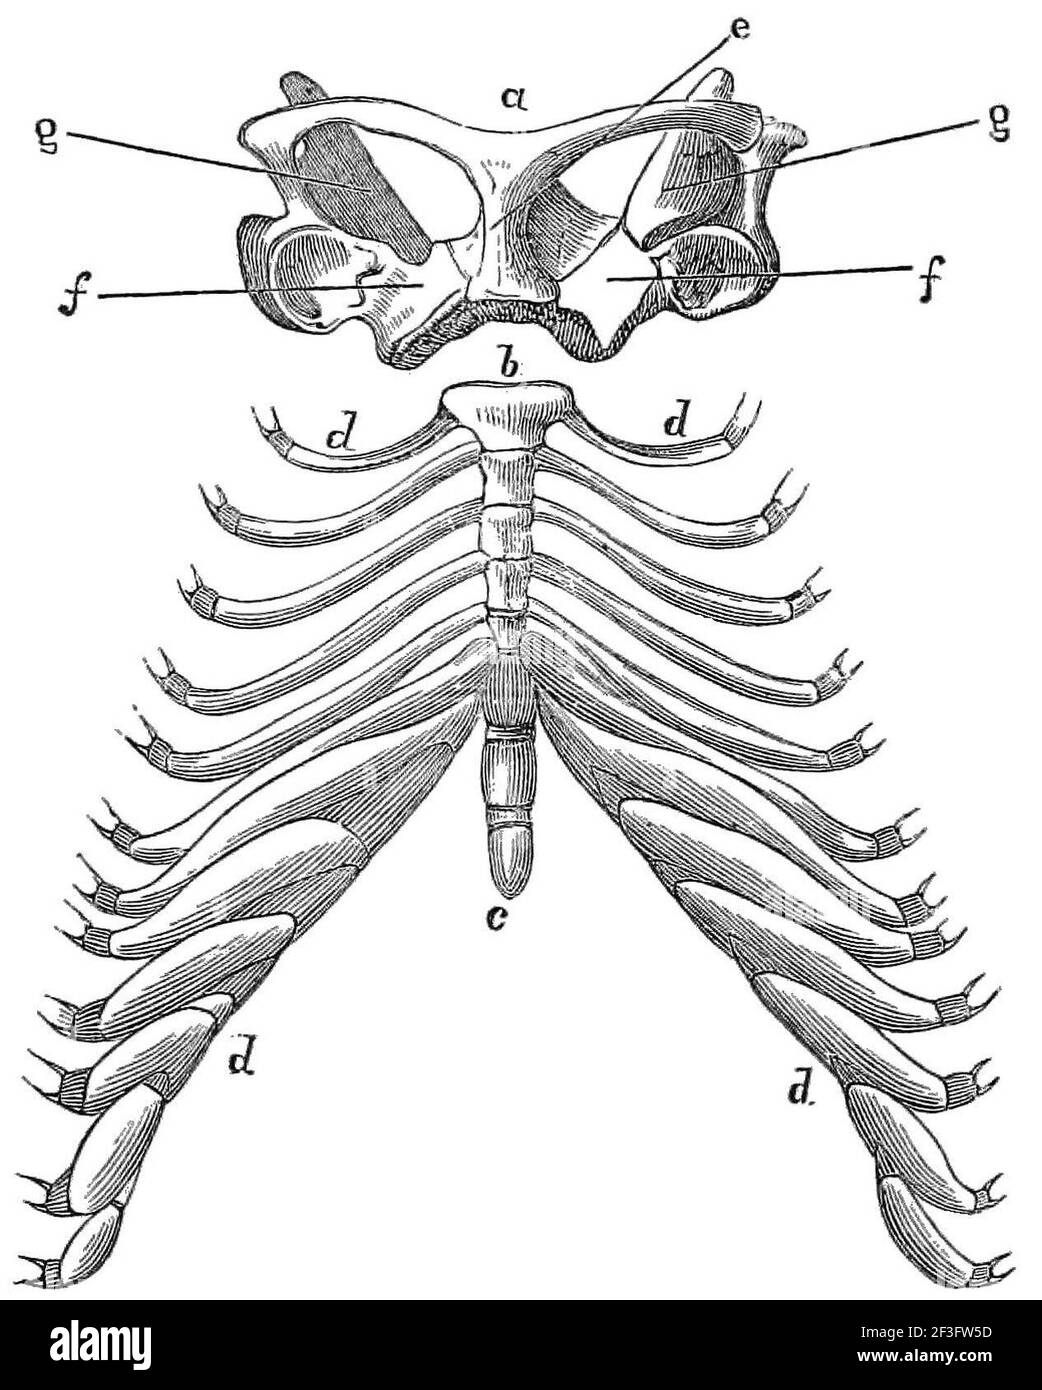 Shoulder and rib cage of the echidna. Stock Photo